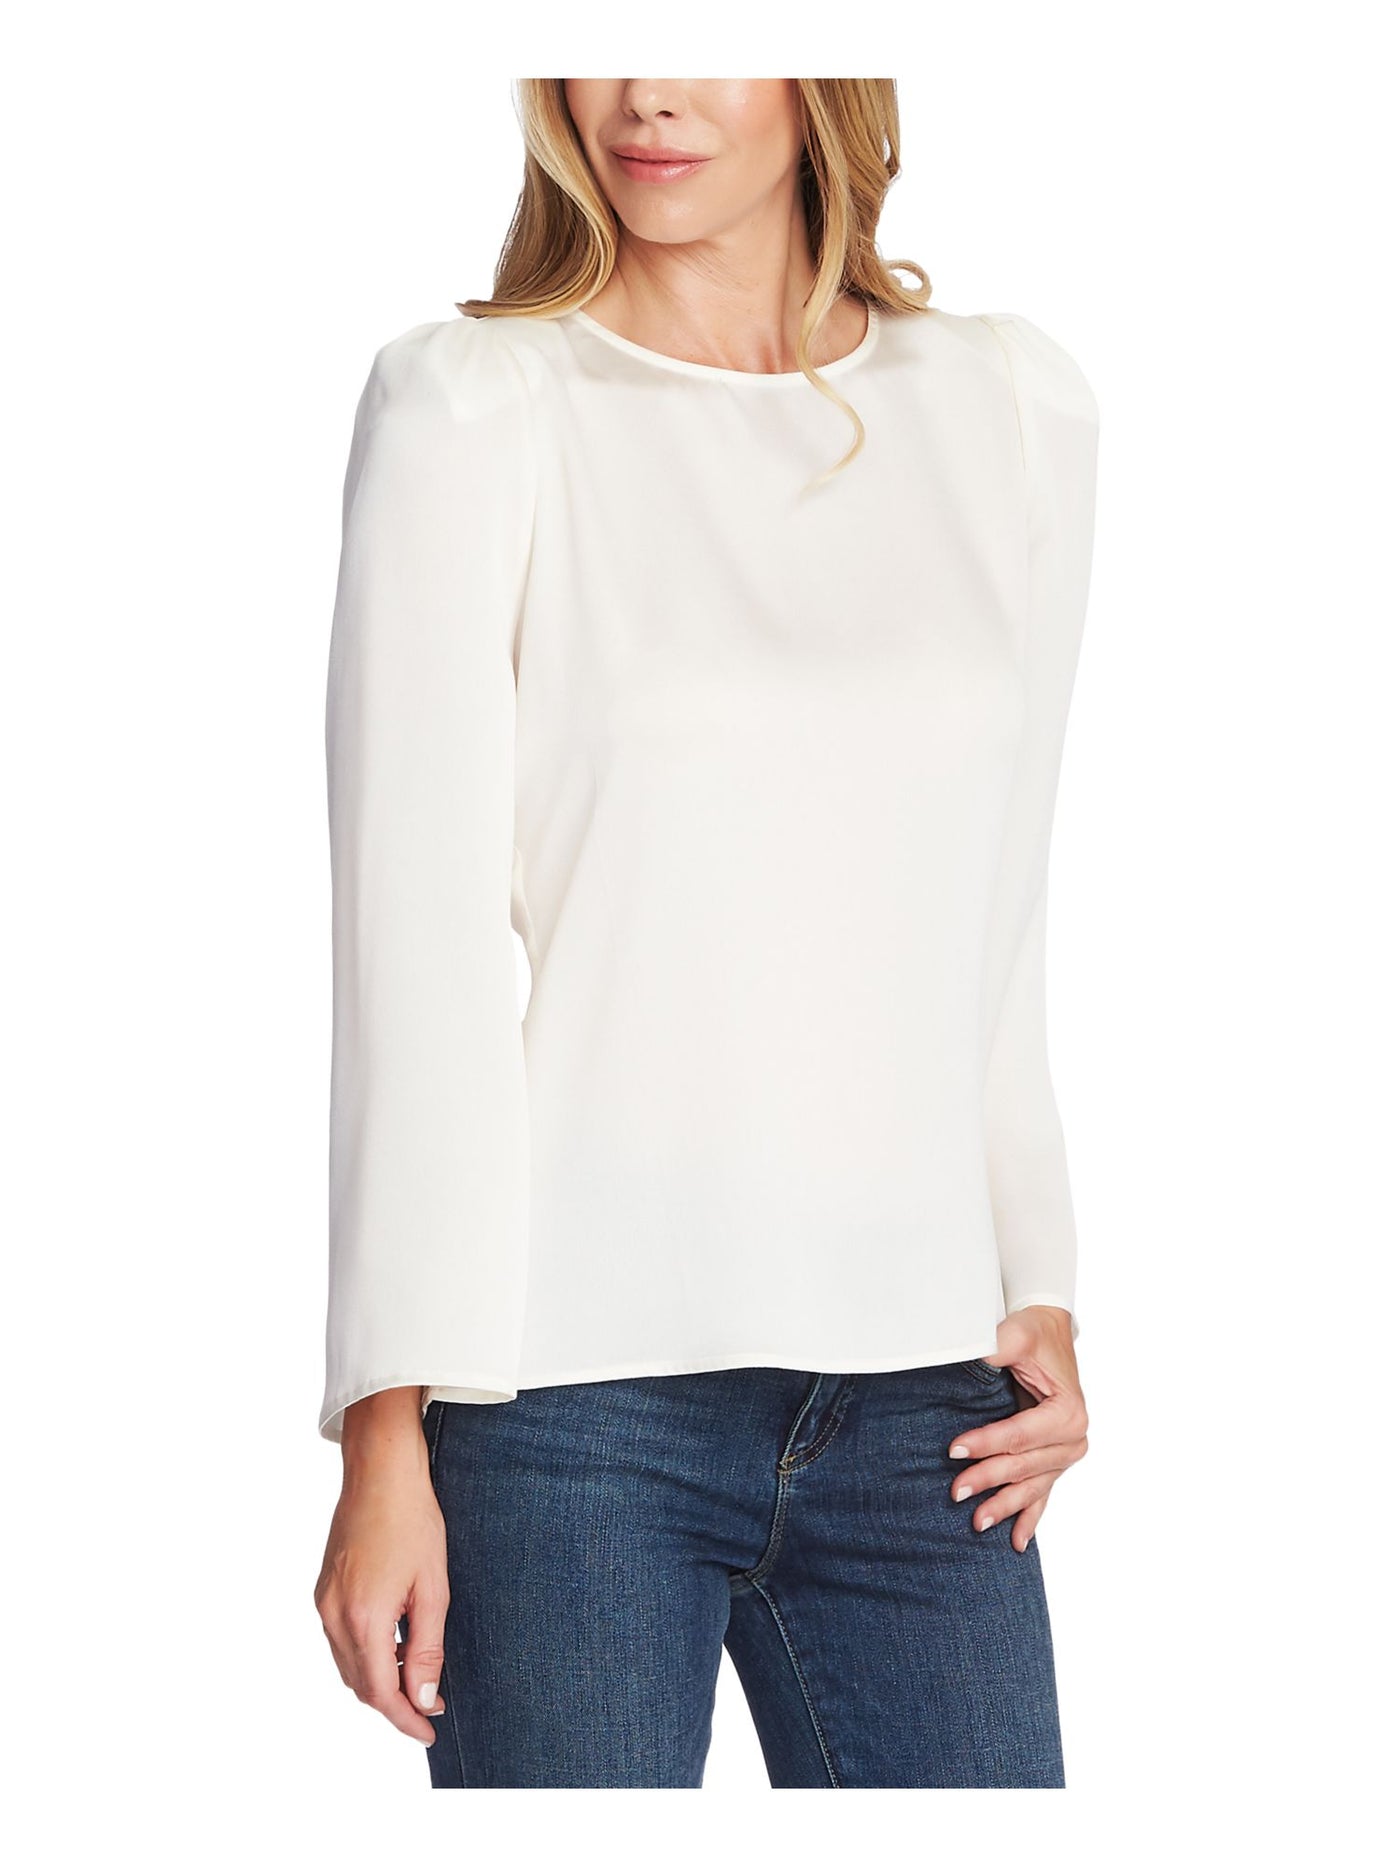 VINCE CAMUTO Womens Ivory Long Sleeve Crew Neck Blouse XS